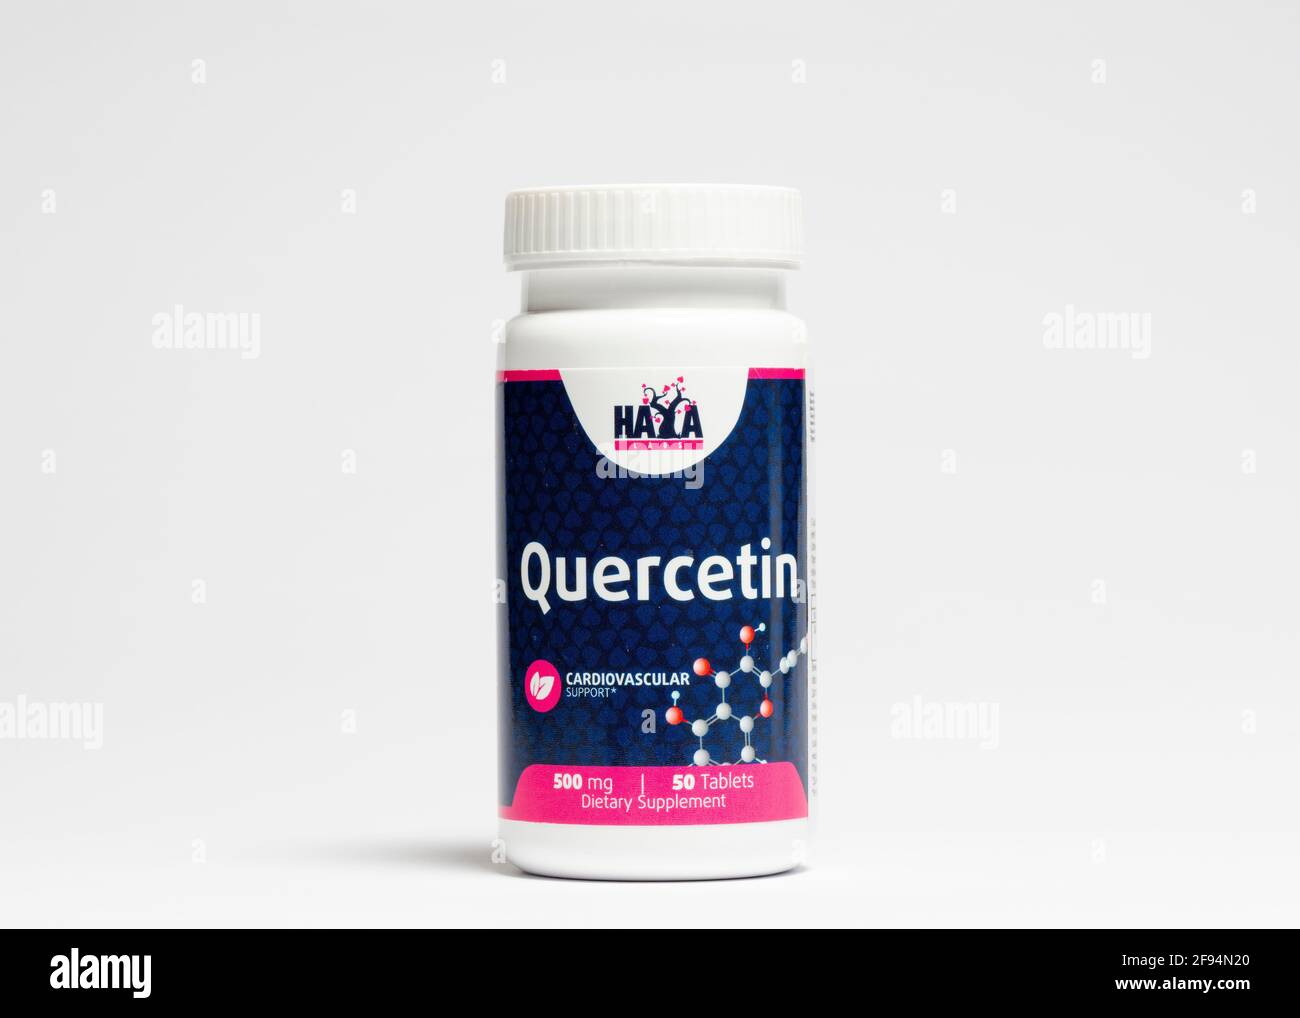 Quercetin 500mg dietary supplement tablets for immune health and cardiovascular support. Manufactured for HaYa Labs LLL. Dietary supplements concept. Stock Photo